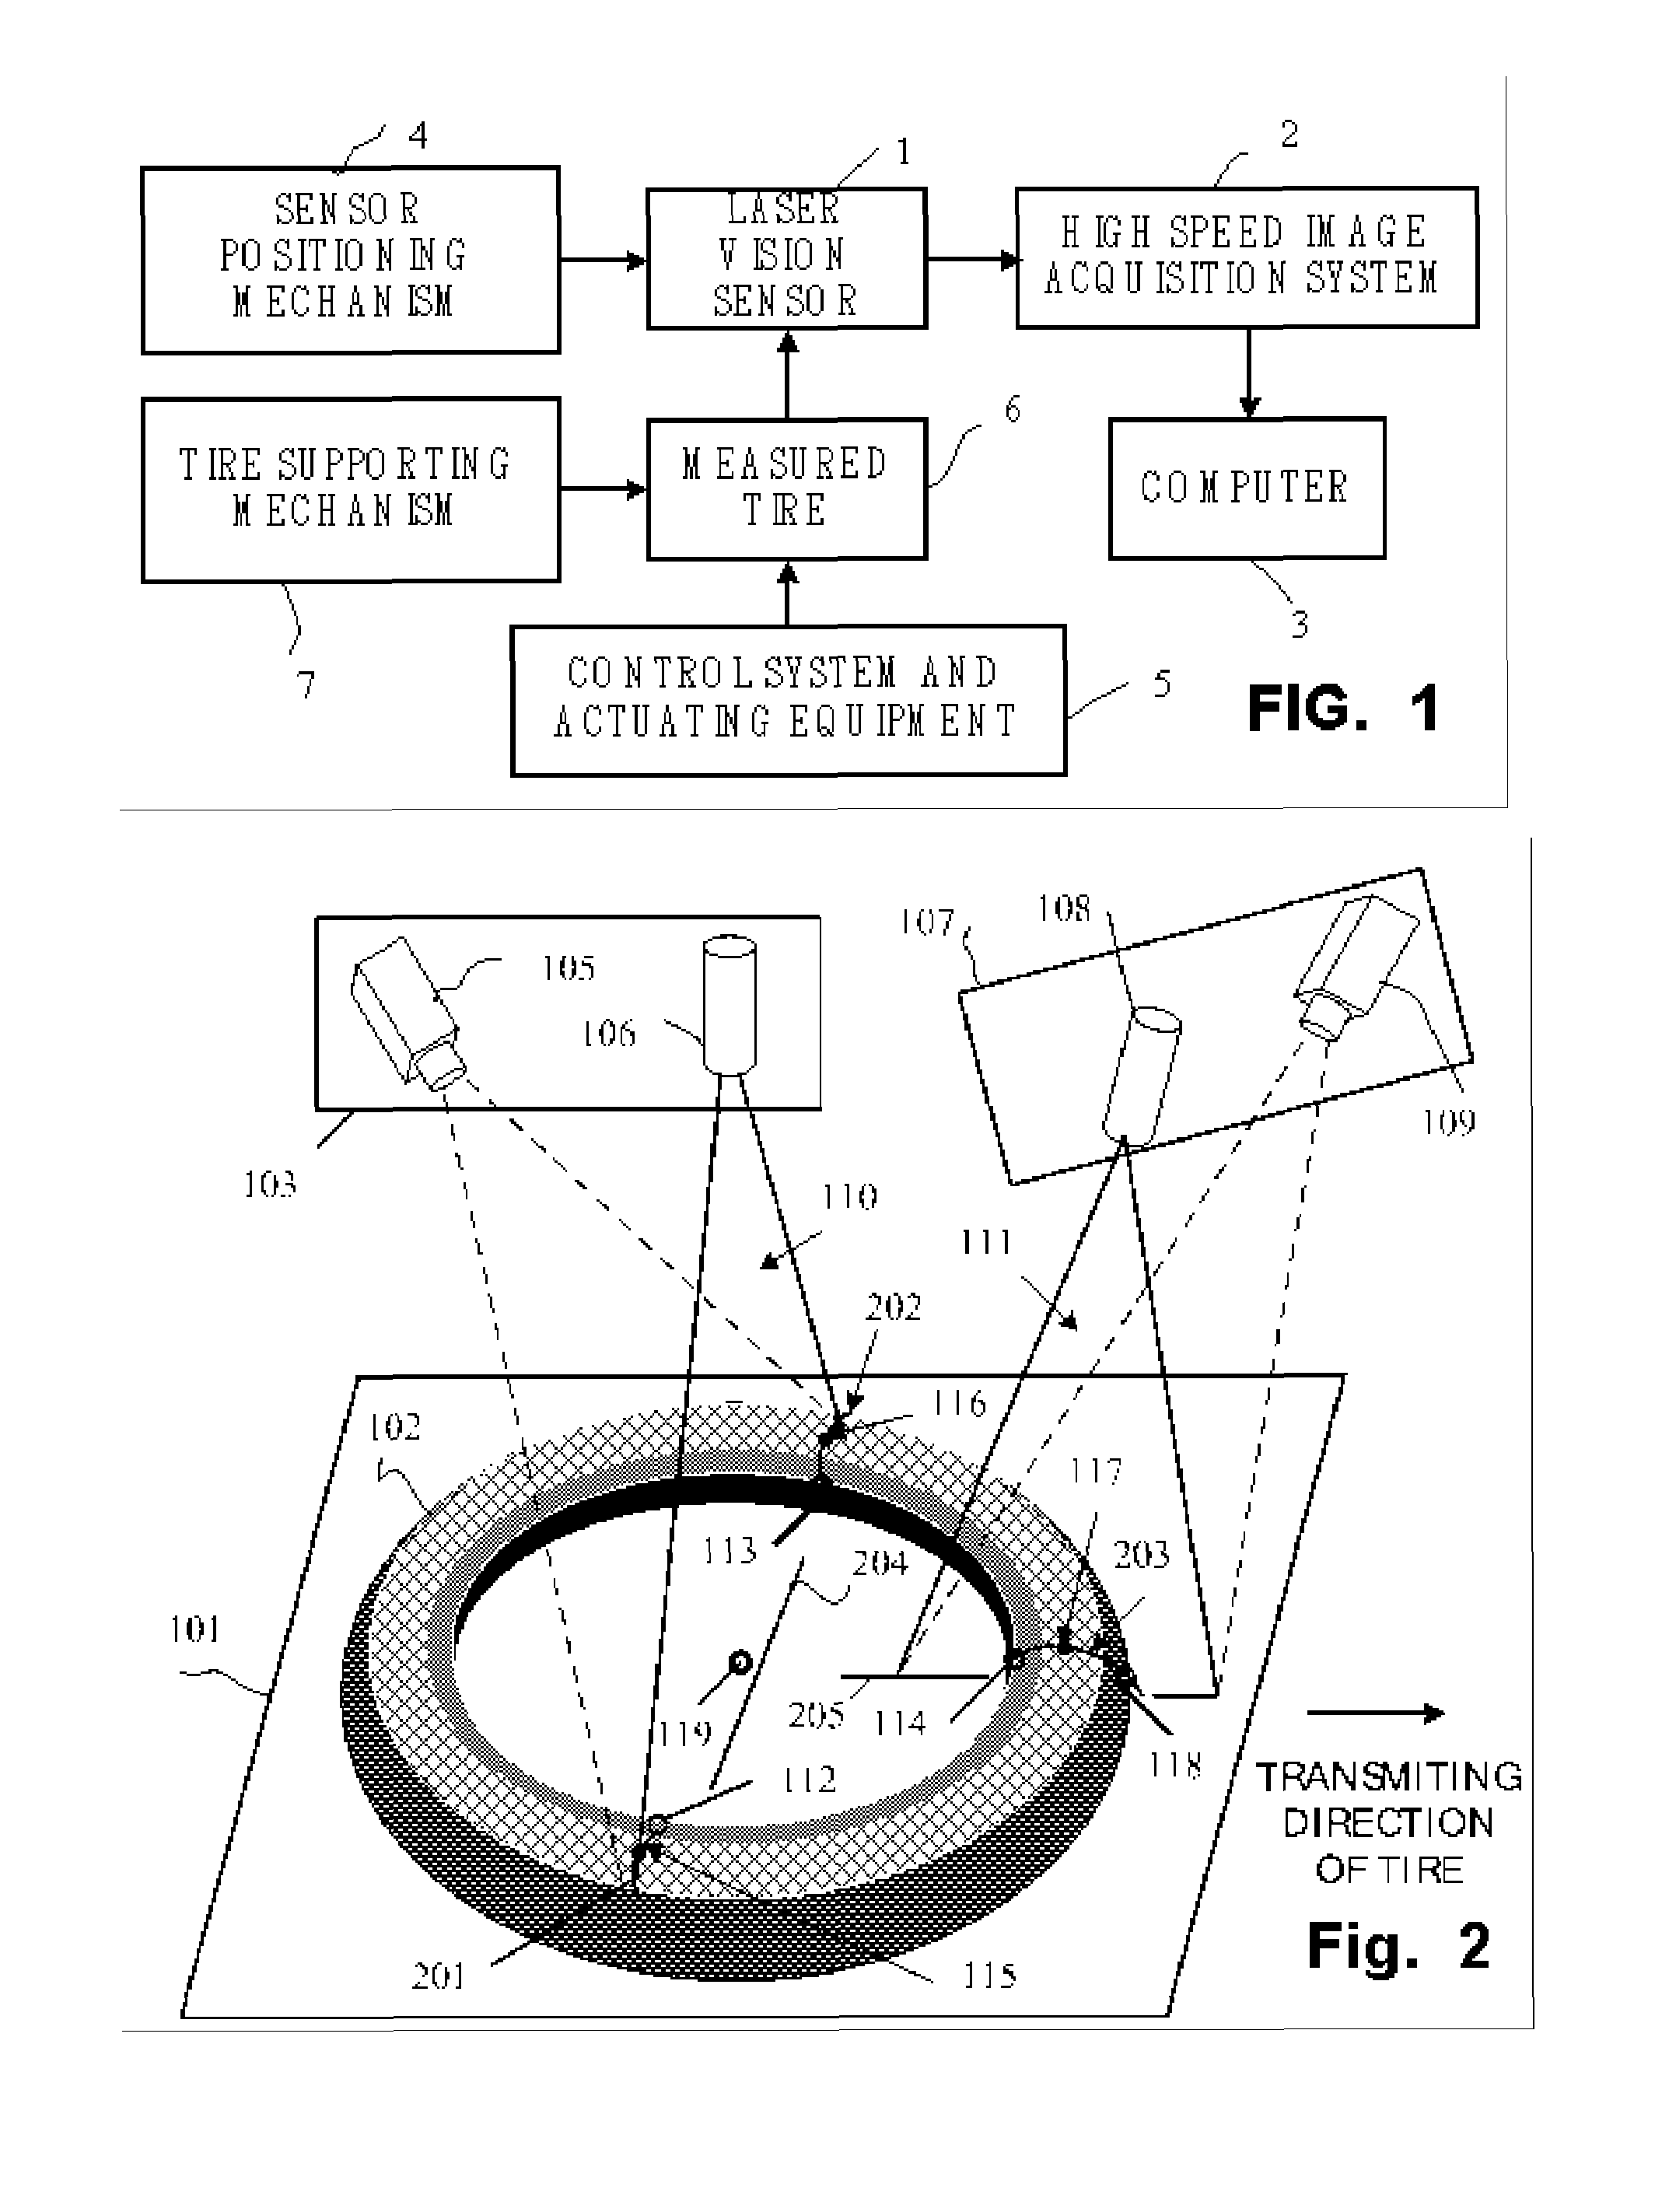 Method and apparatus for dynamic measuring three-dimensional parameters of tire with laser vision